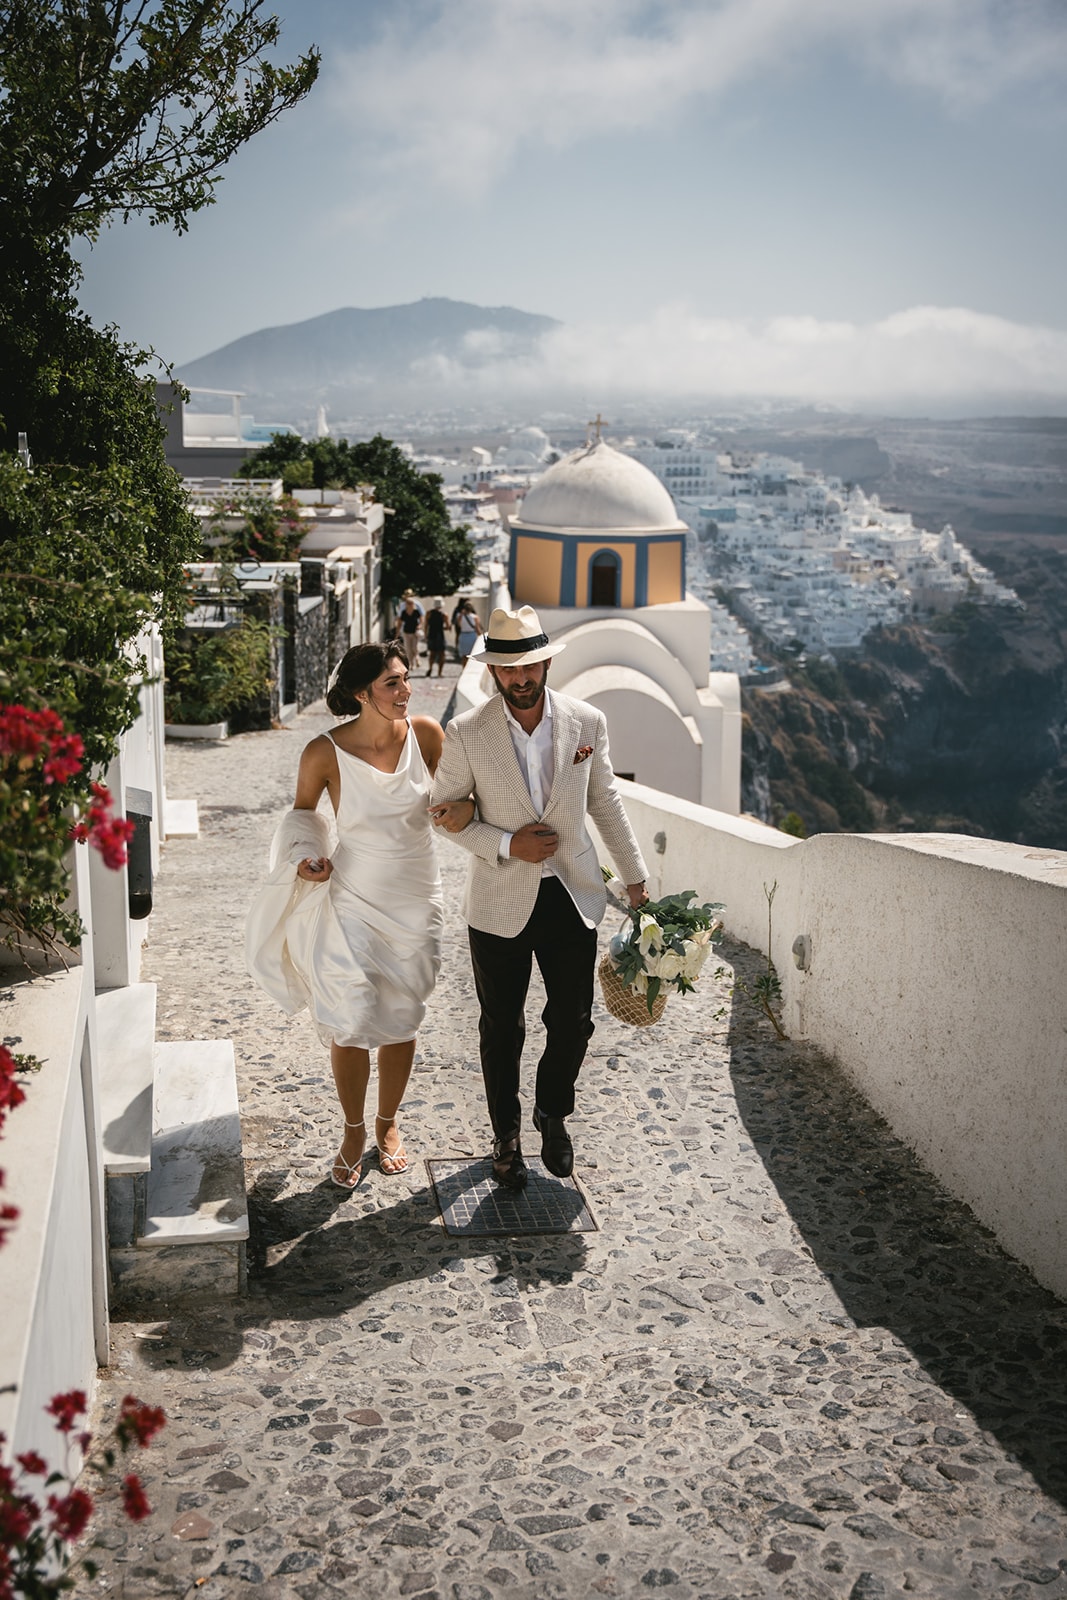 A laughter-filled chase through Fira’s maze, their spirits as free as the Aegean breeze